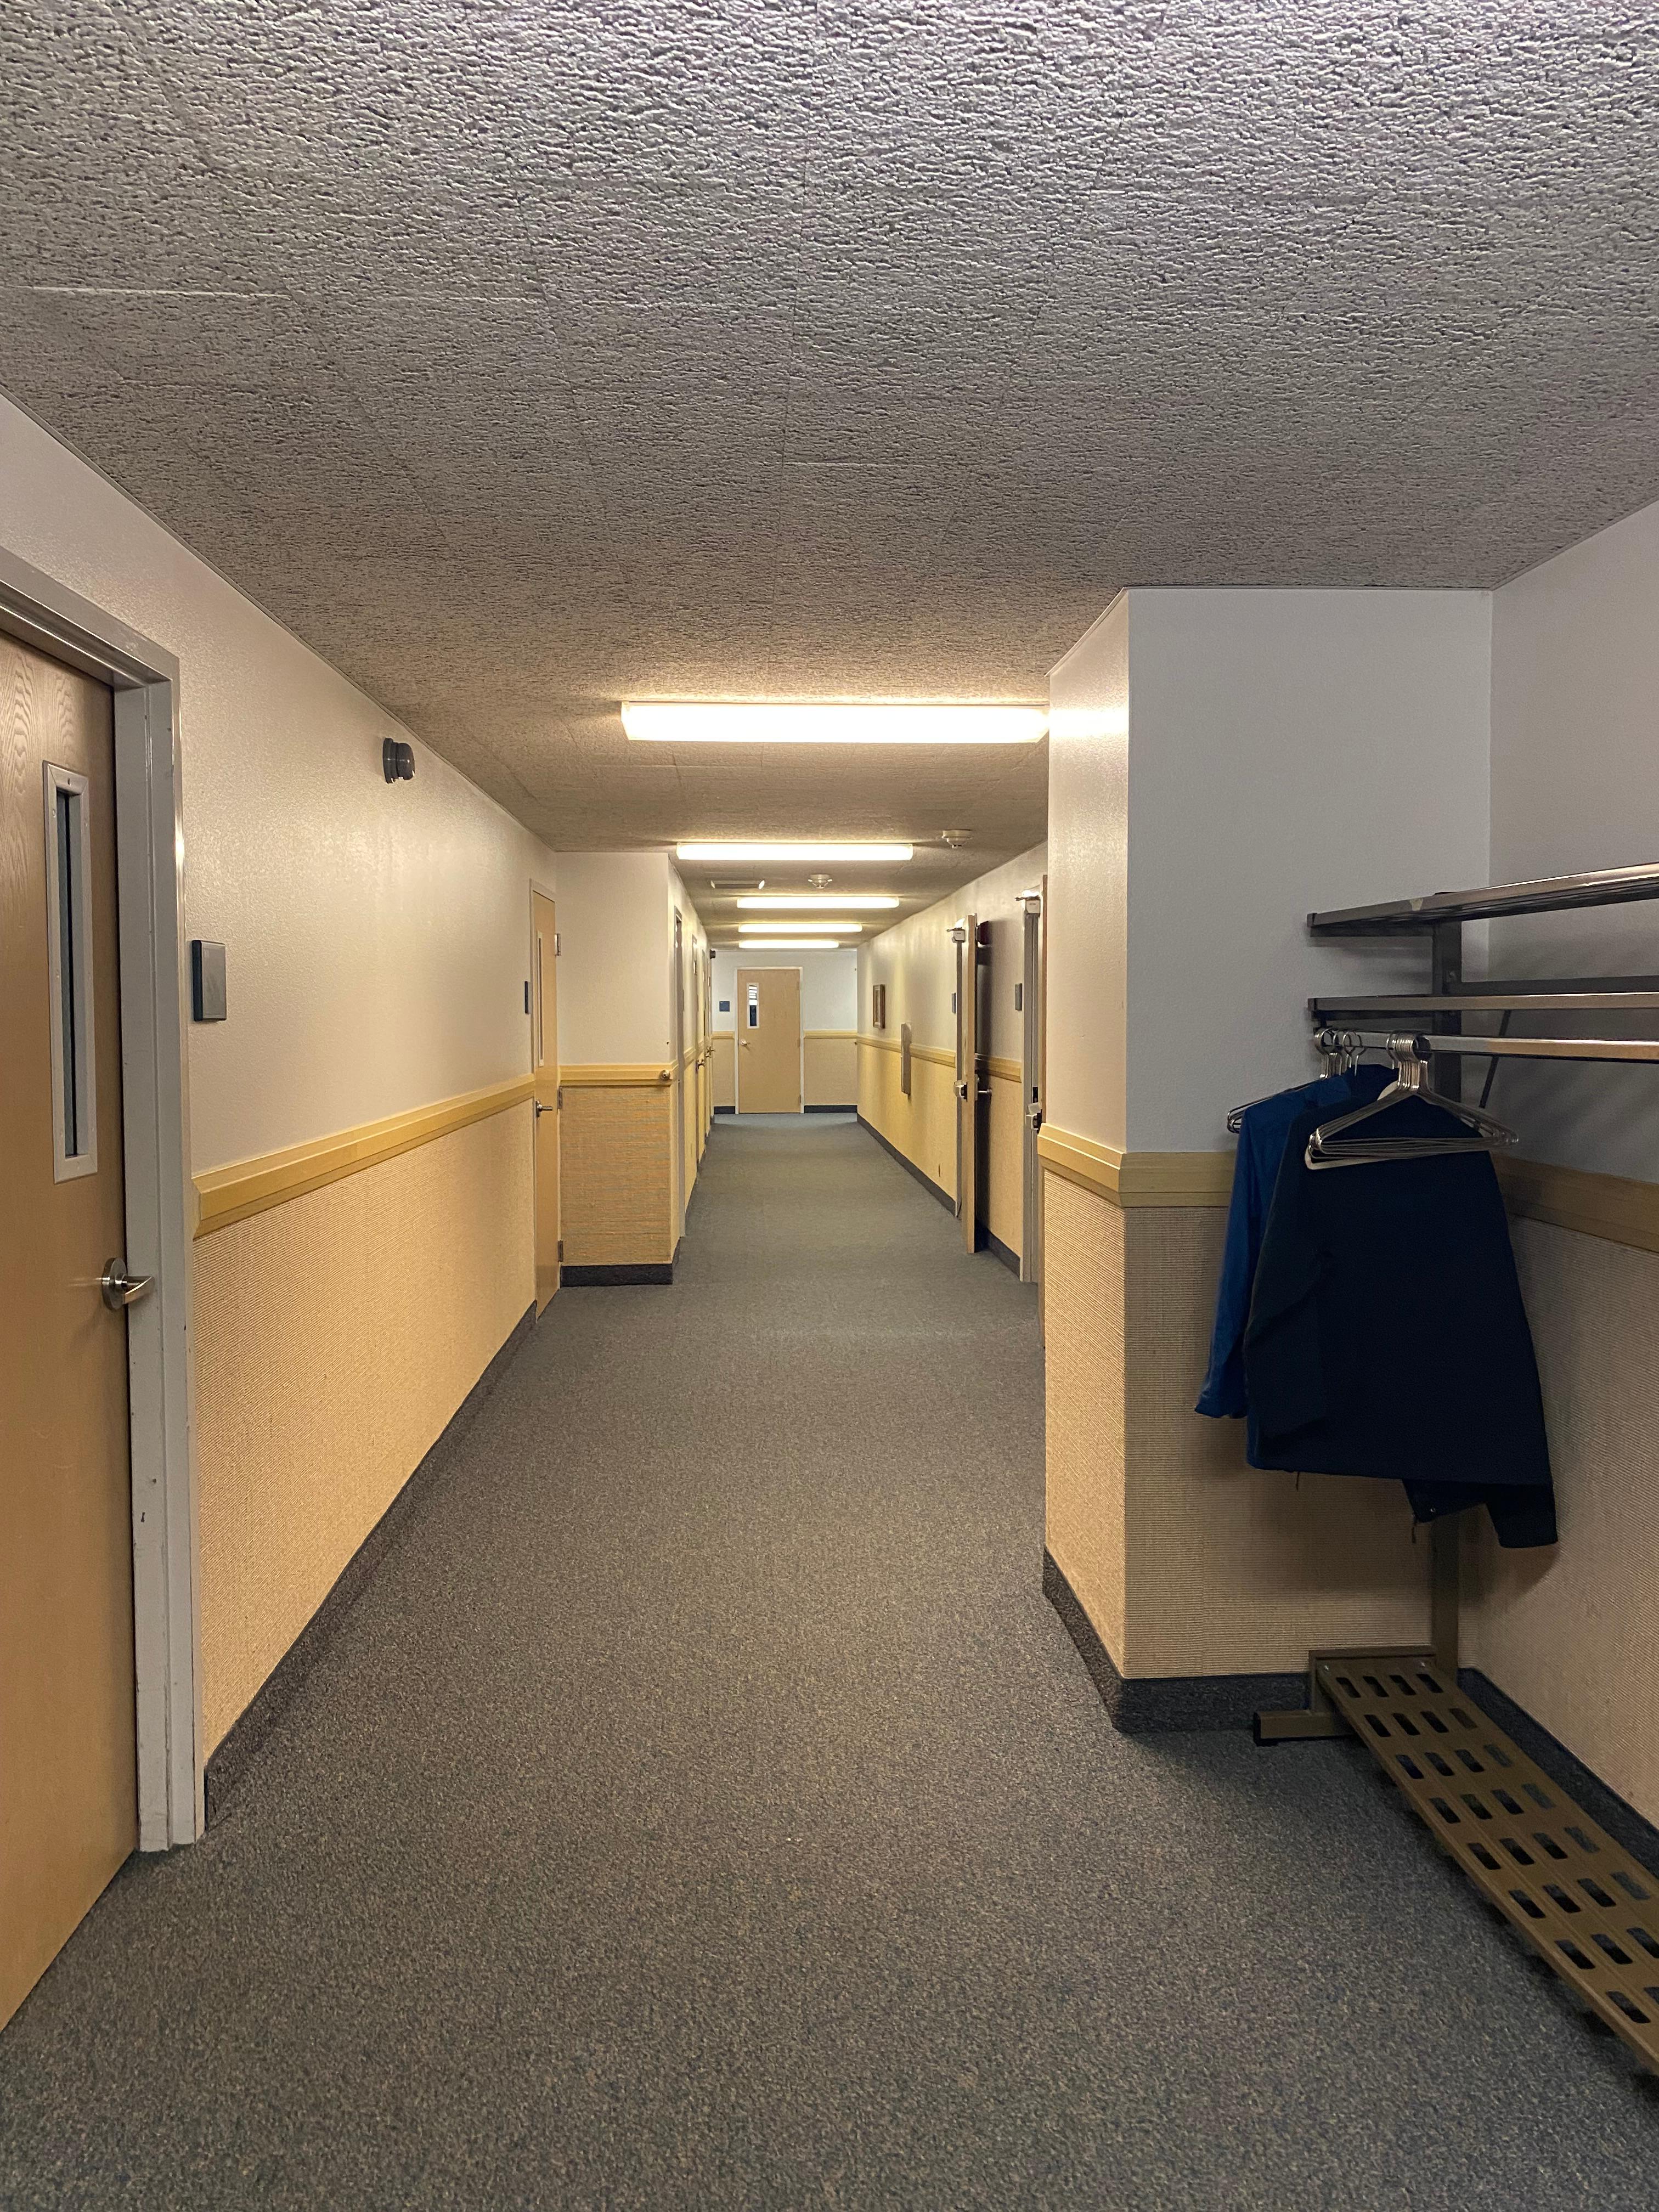 A hallway leading to classrooms, bathrooms, etc.